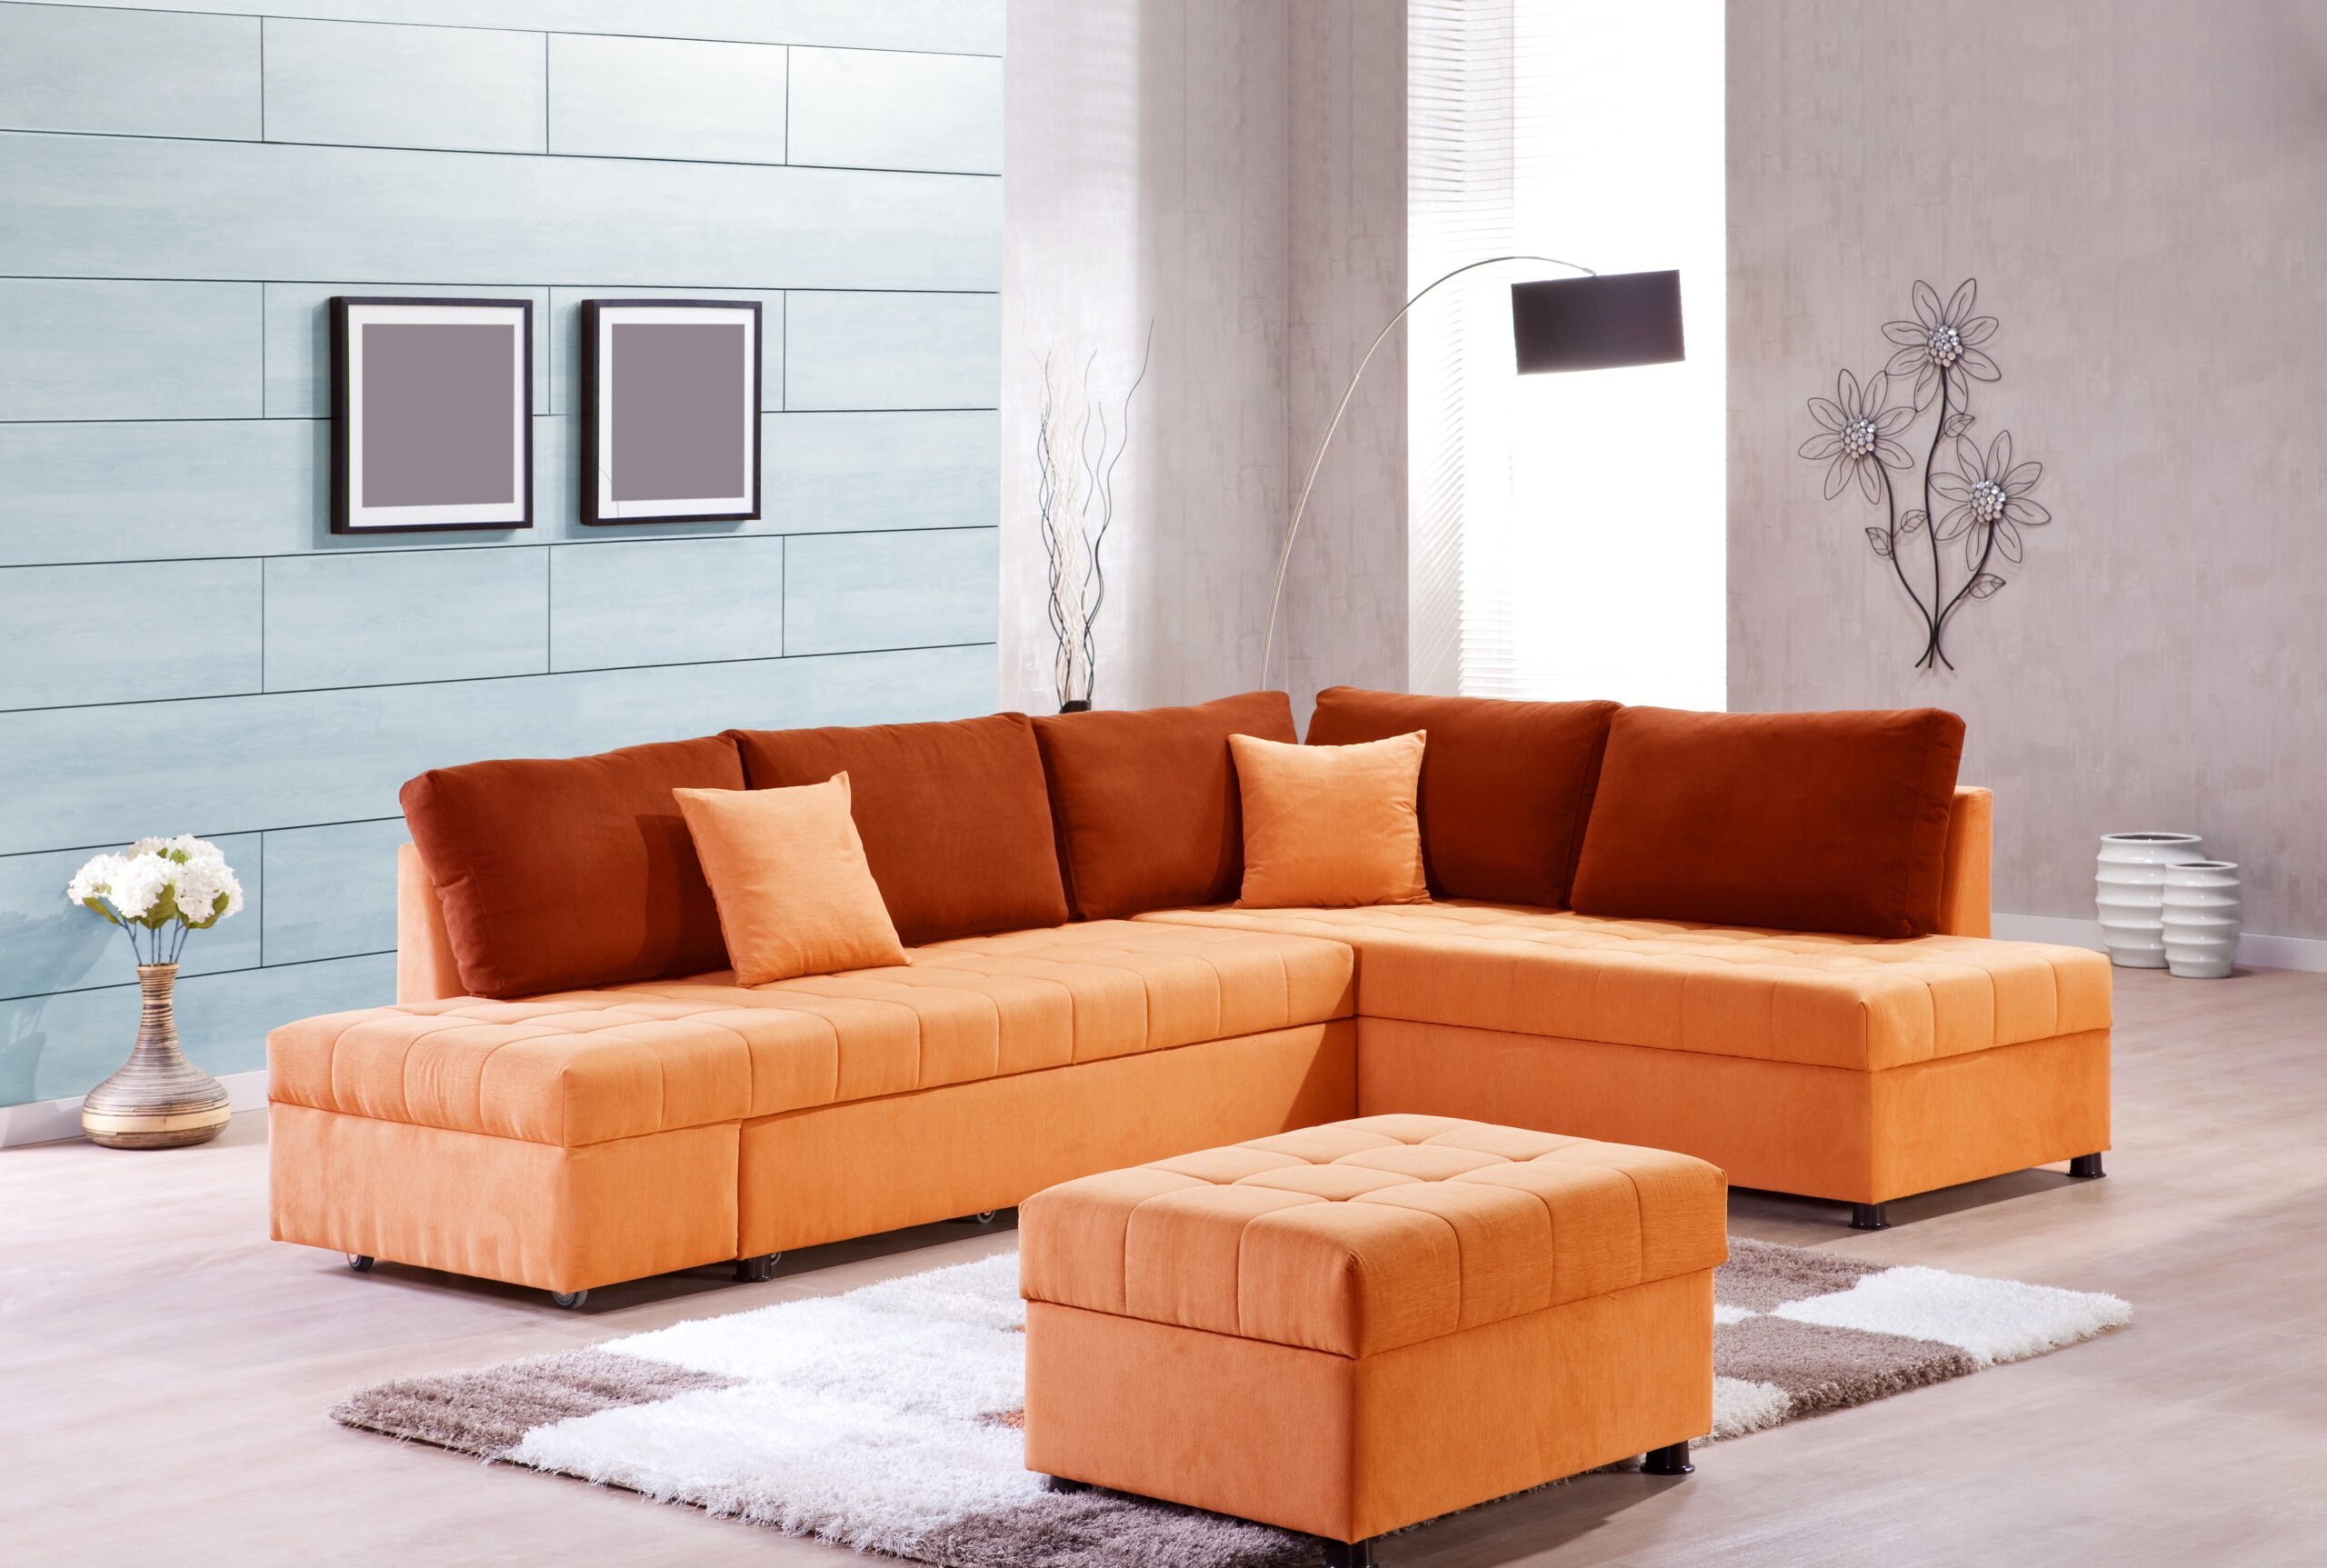 A Selection of Sectional Sofas Offers Six Benefits